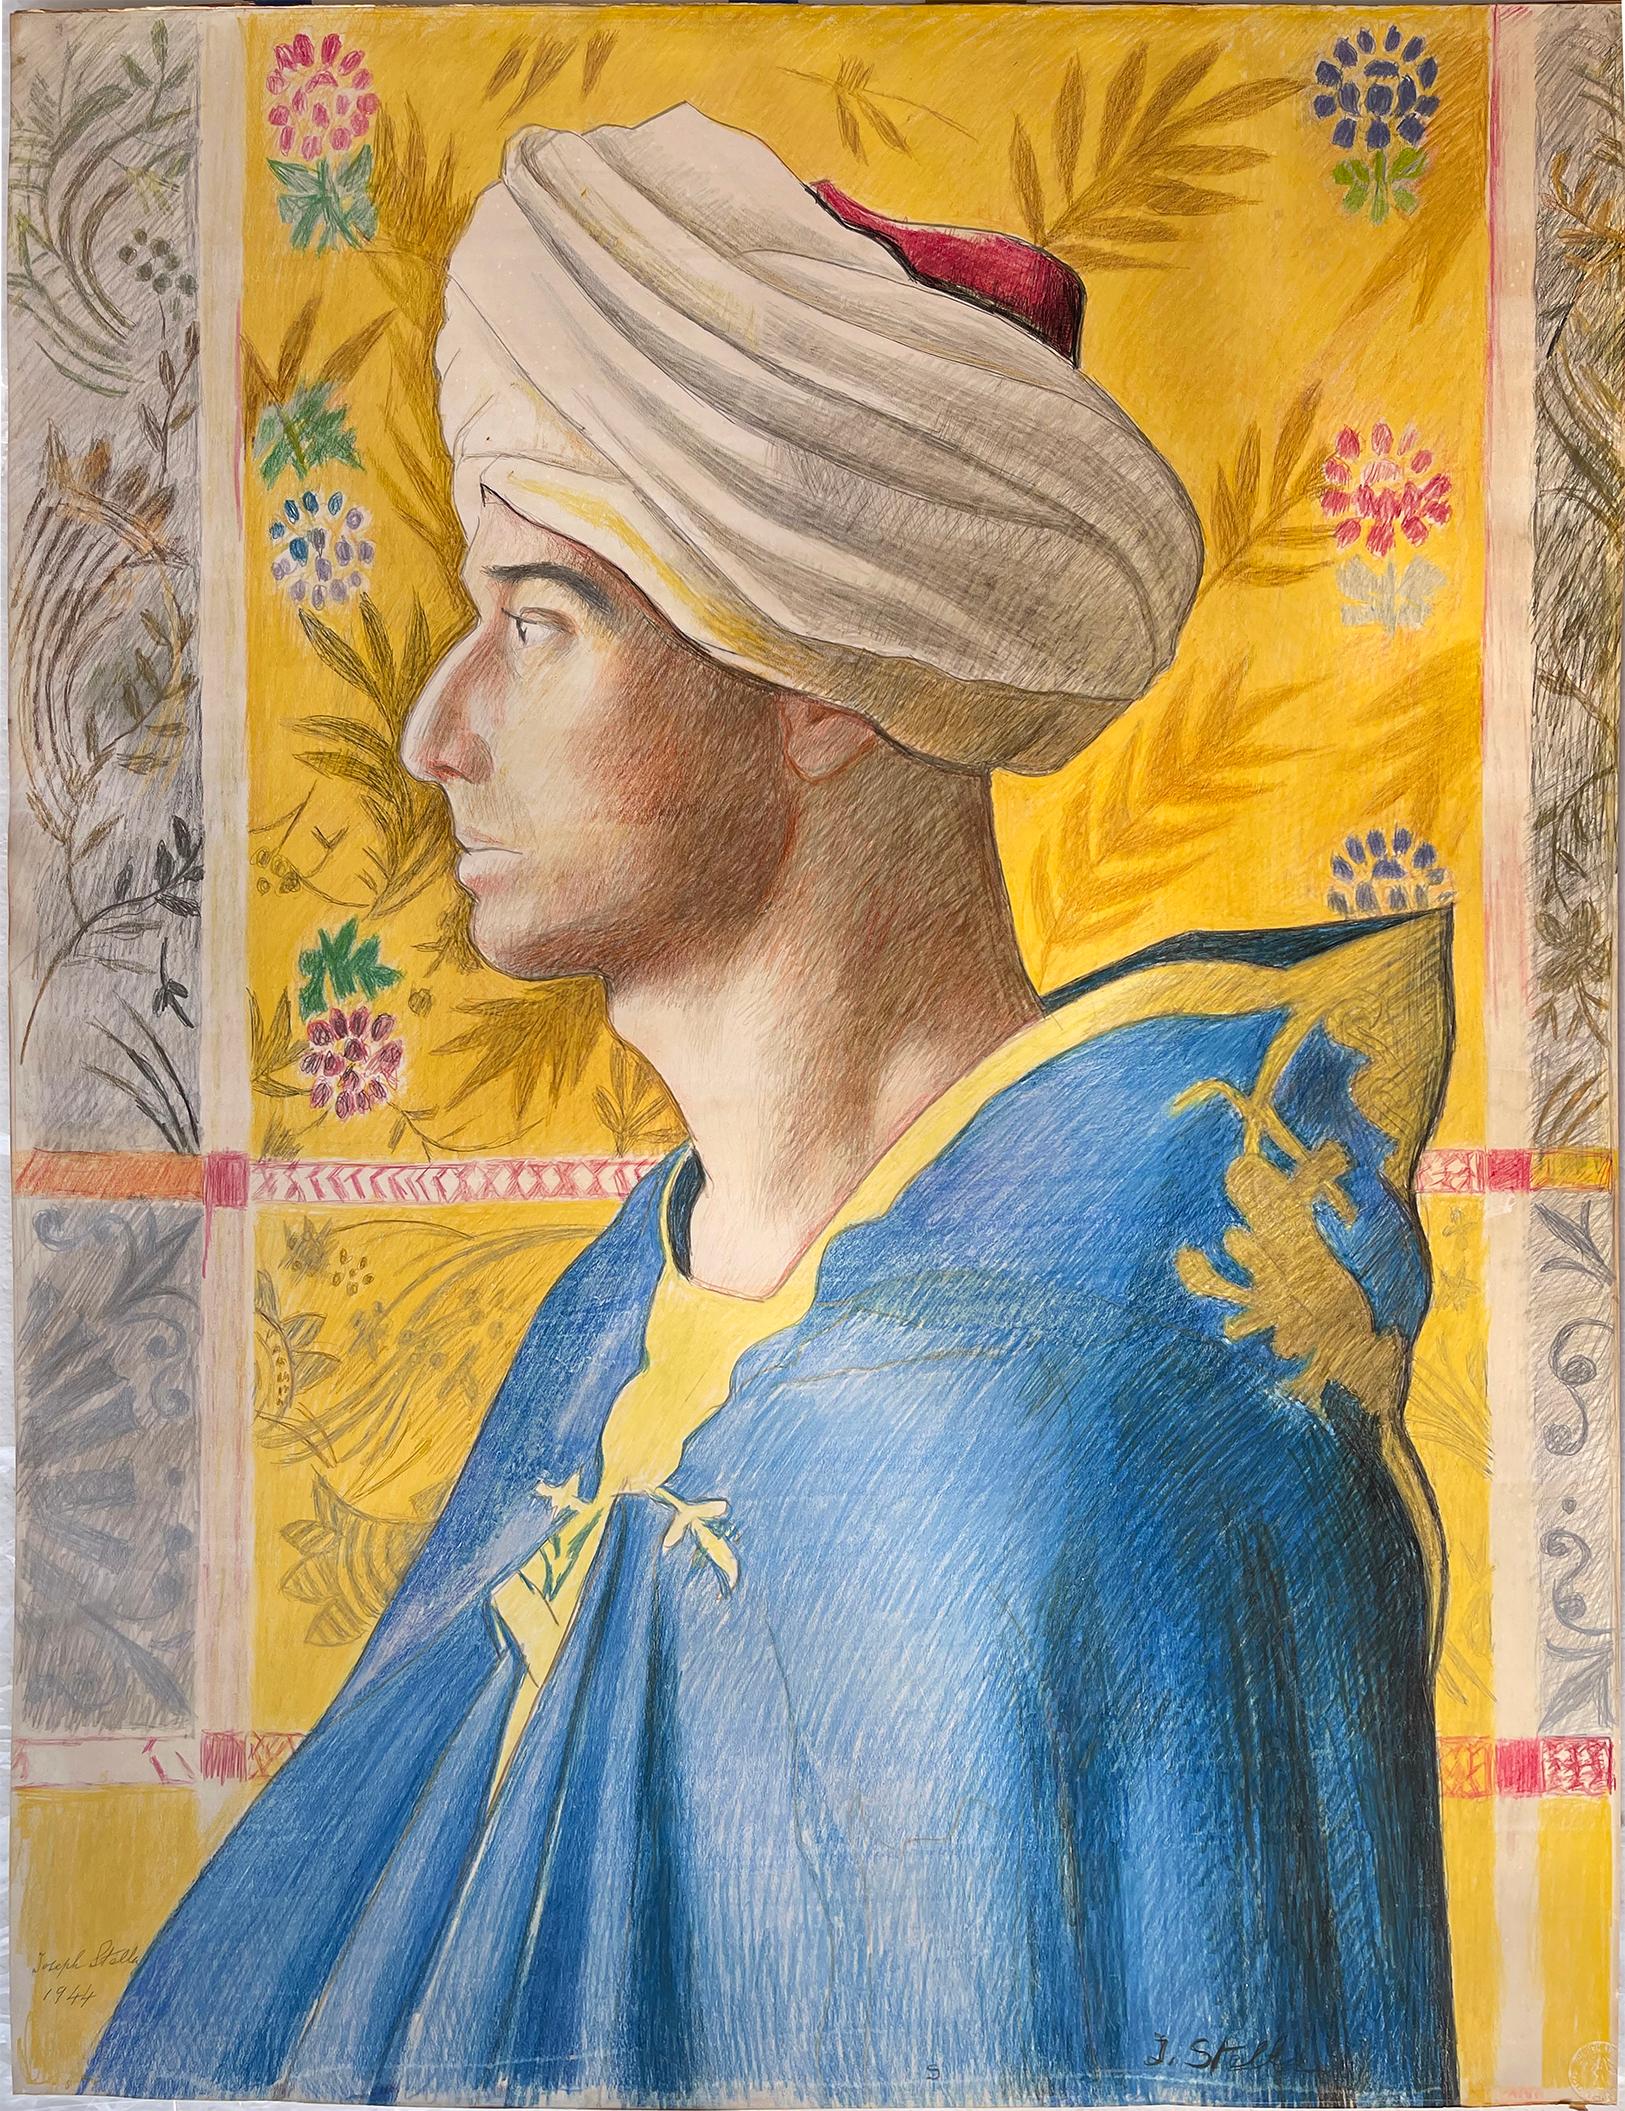 Middle Eastern Man with Turban and Blue Cloak in Profile against Yellow - Art by Joseph Stella